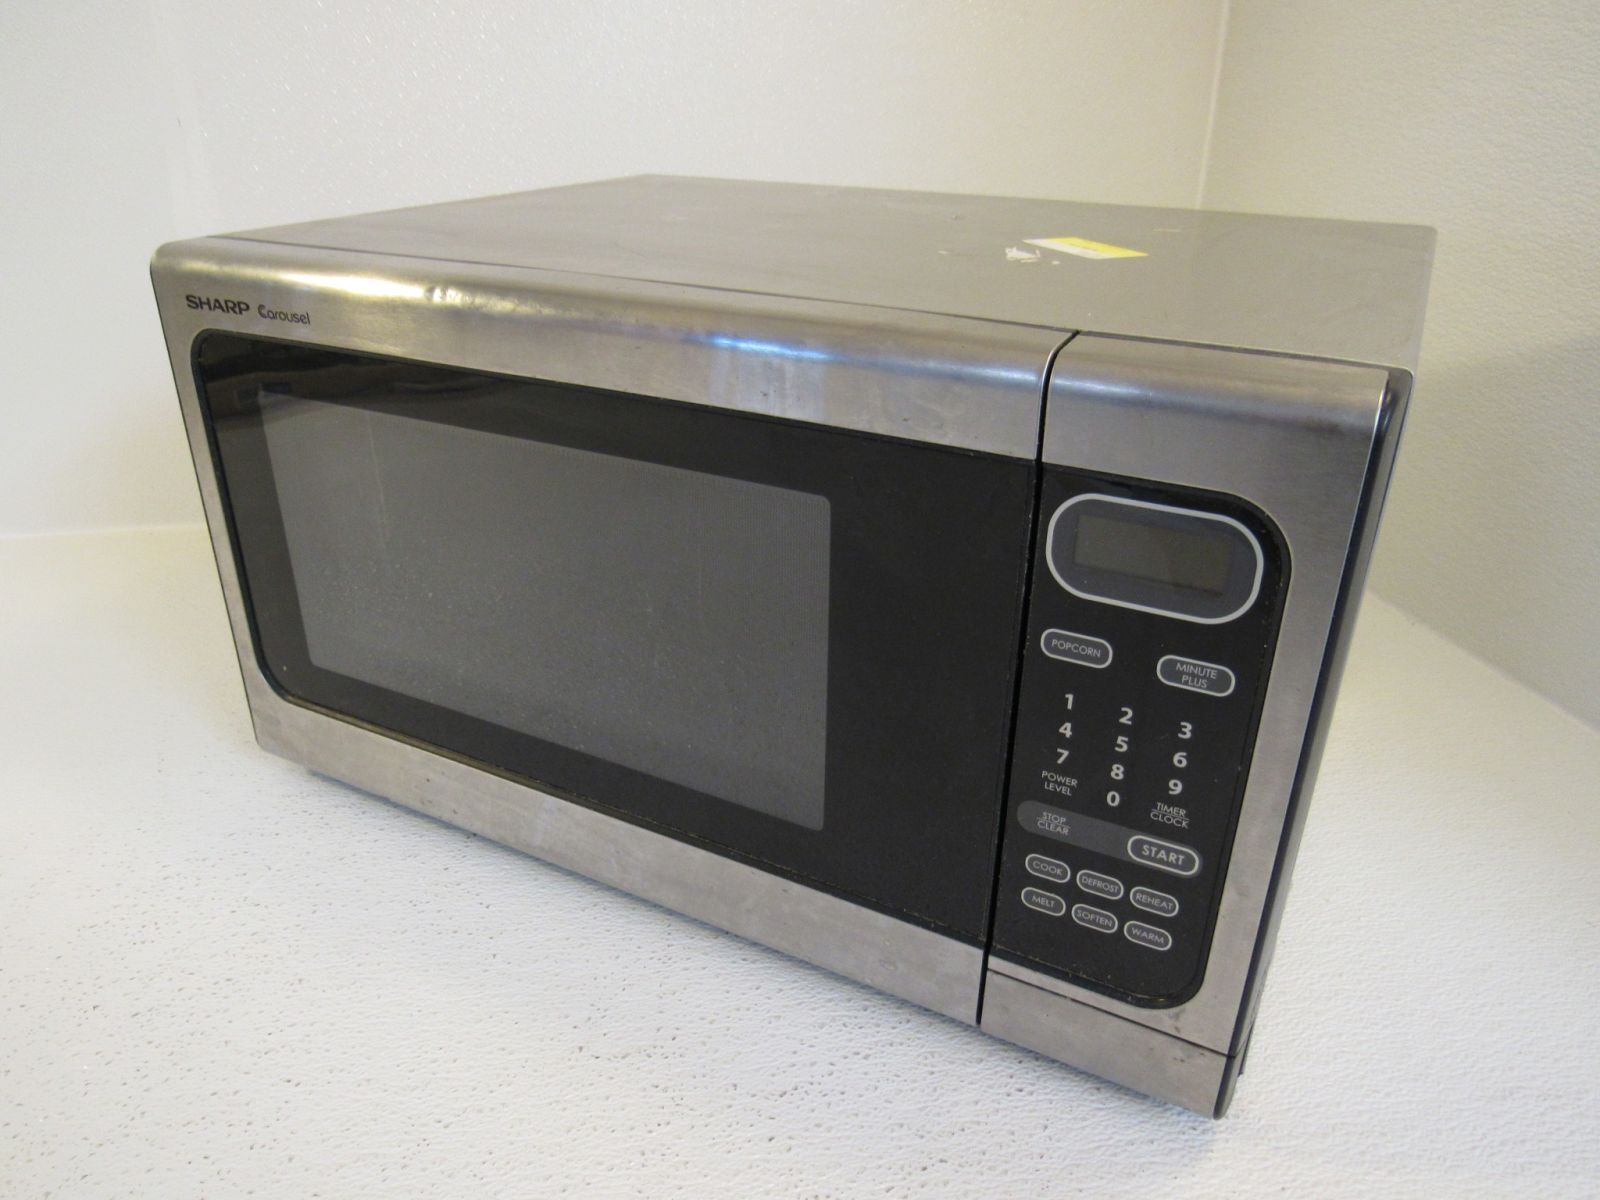 Sharp Countertop Turntable Microwave Oven U4 Stainless/black 1.4 Cuft R408ls